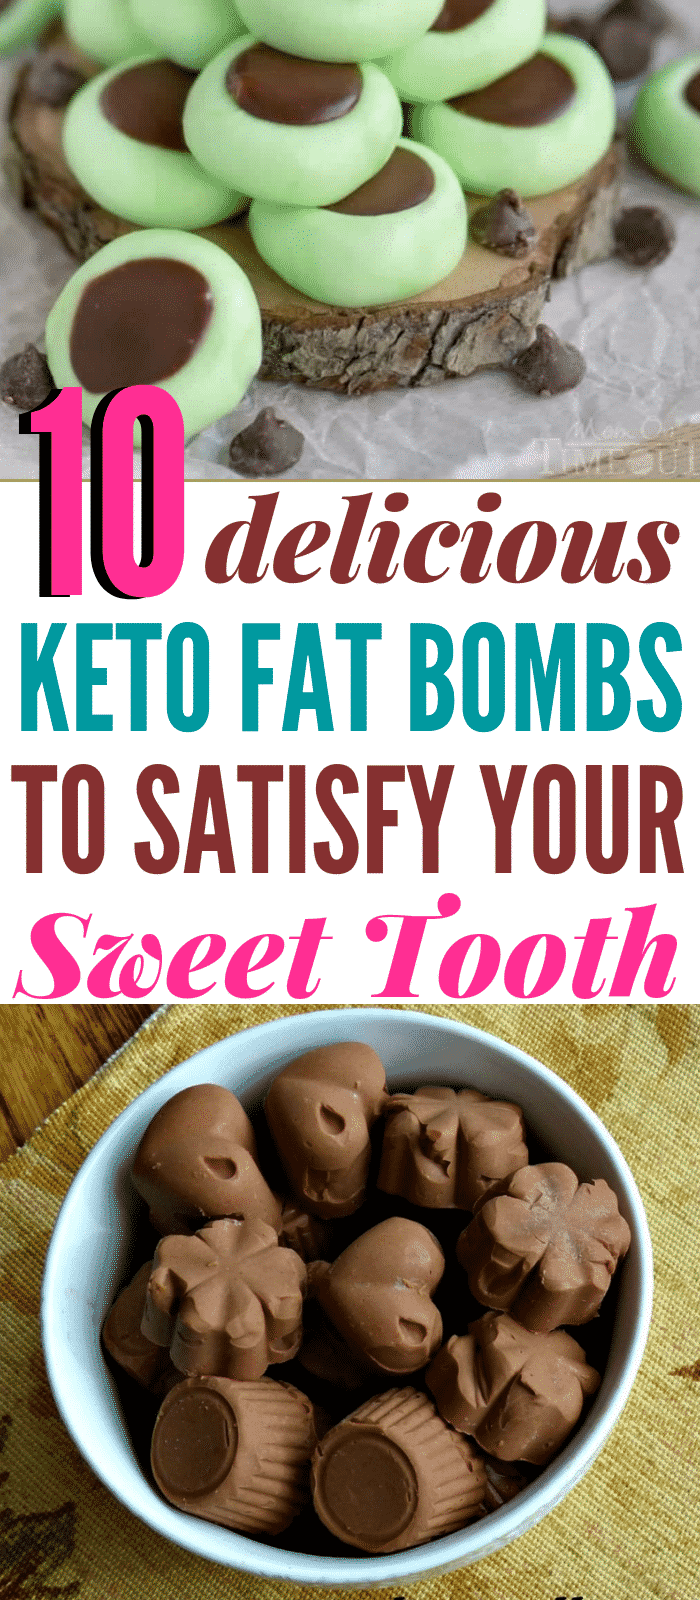 Looking for Keto Fat Bombs to Satisfy Your Sweet Tooth While Staying in Ketosis? Check out these 10 delicious keto fat bomb recipes == srcset=